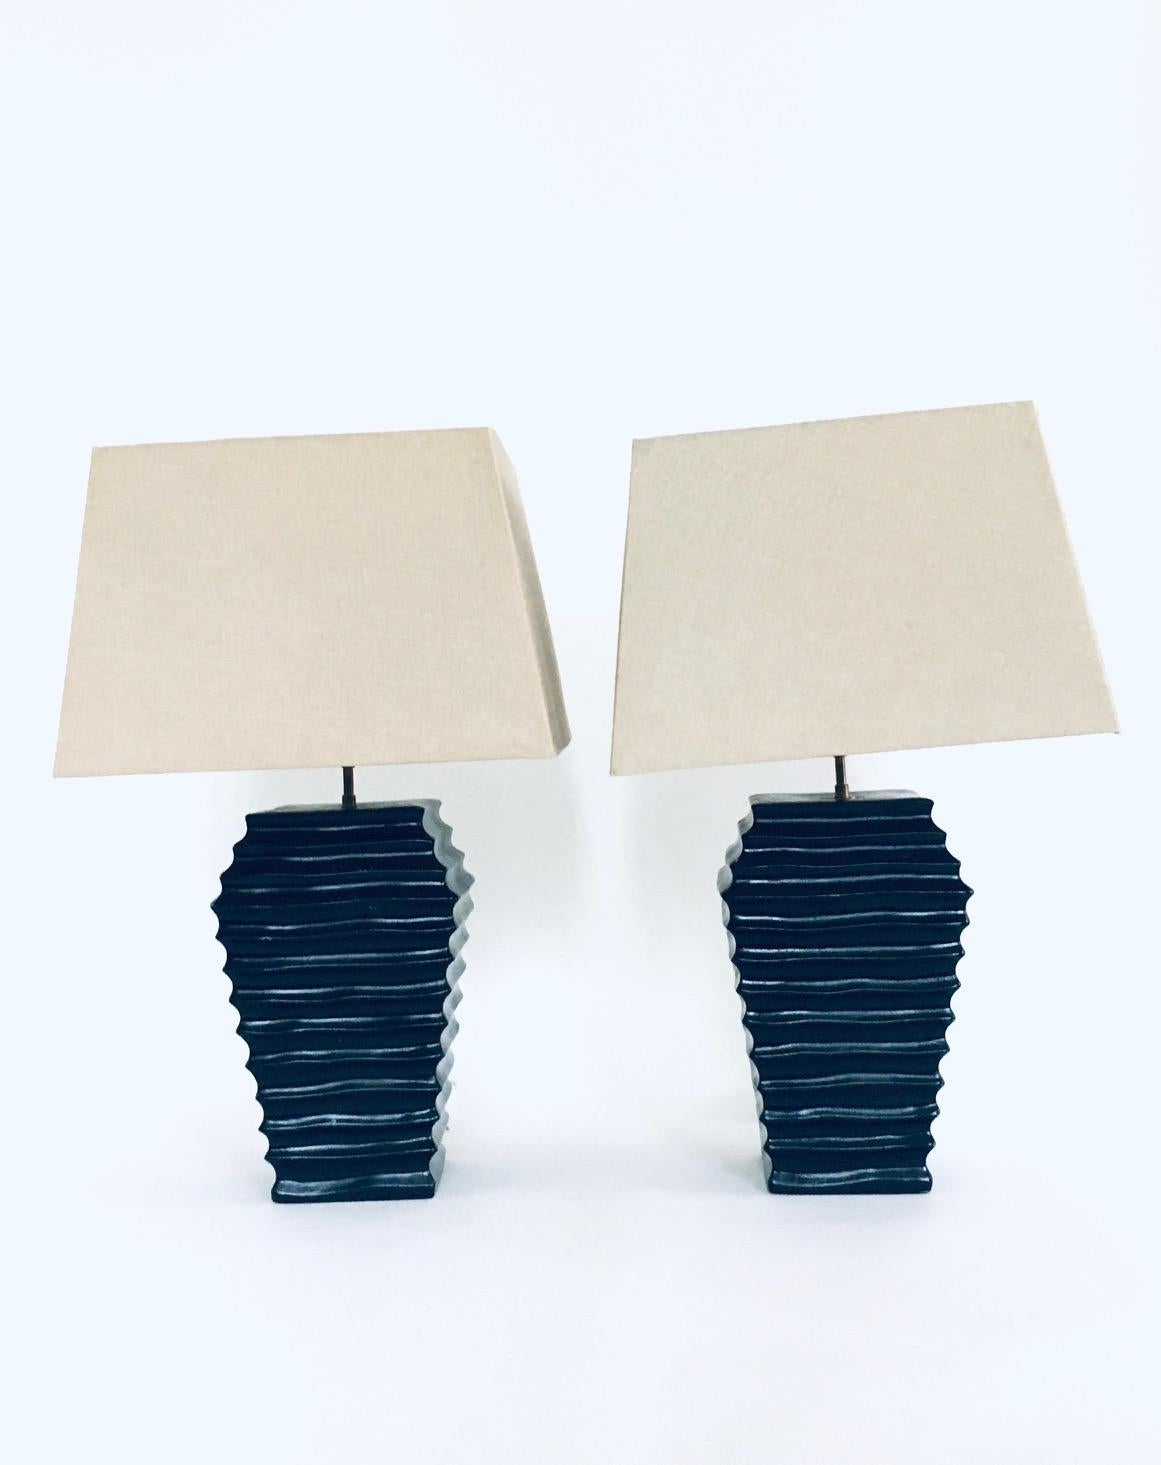 Vintage Design Ceramic Table Lamp set. Made in Spain, 1970's period. Black painted white clay molded lamp base with brass trims and newer shades. These come in very good condition, with minor wear to the base and shades. Each lamp measures: 45cm x